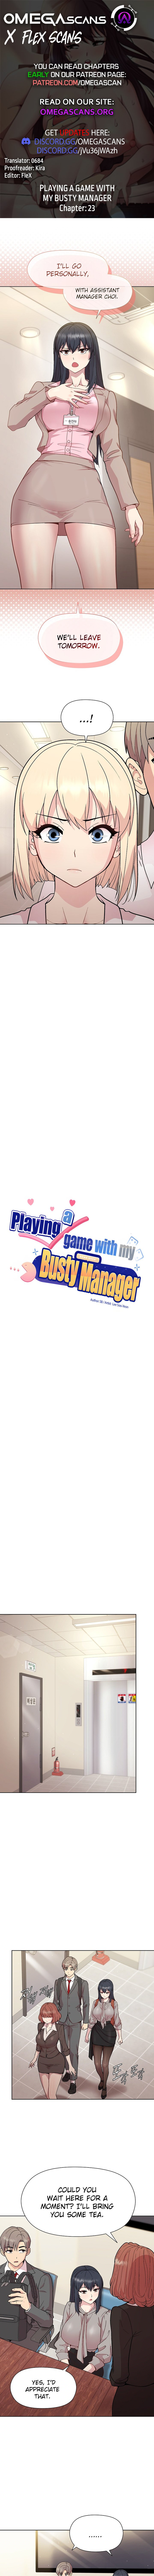 Playing a game with my Busty Manager - Chapter 23 Page 1